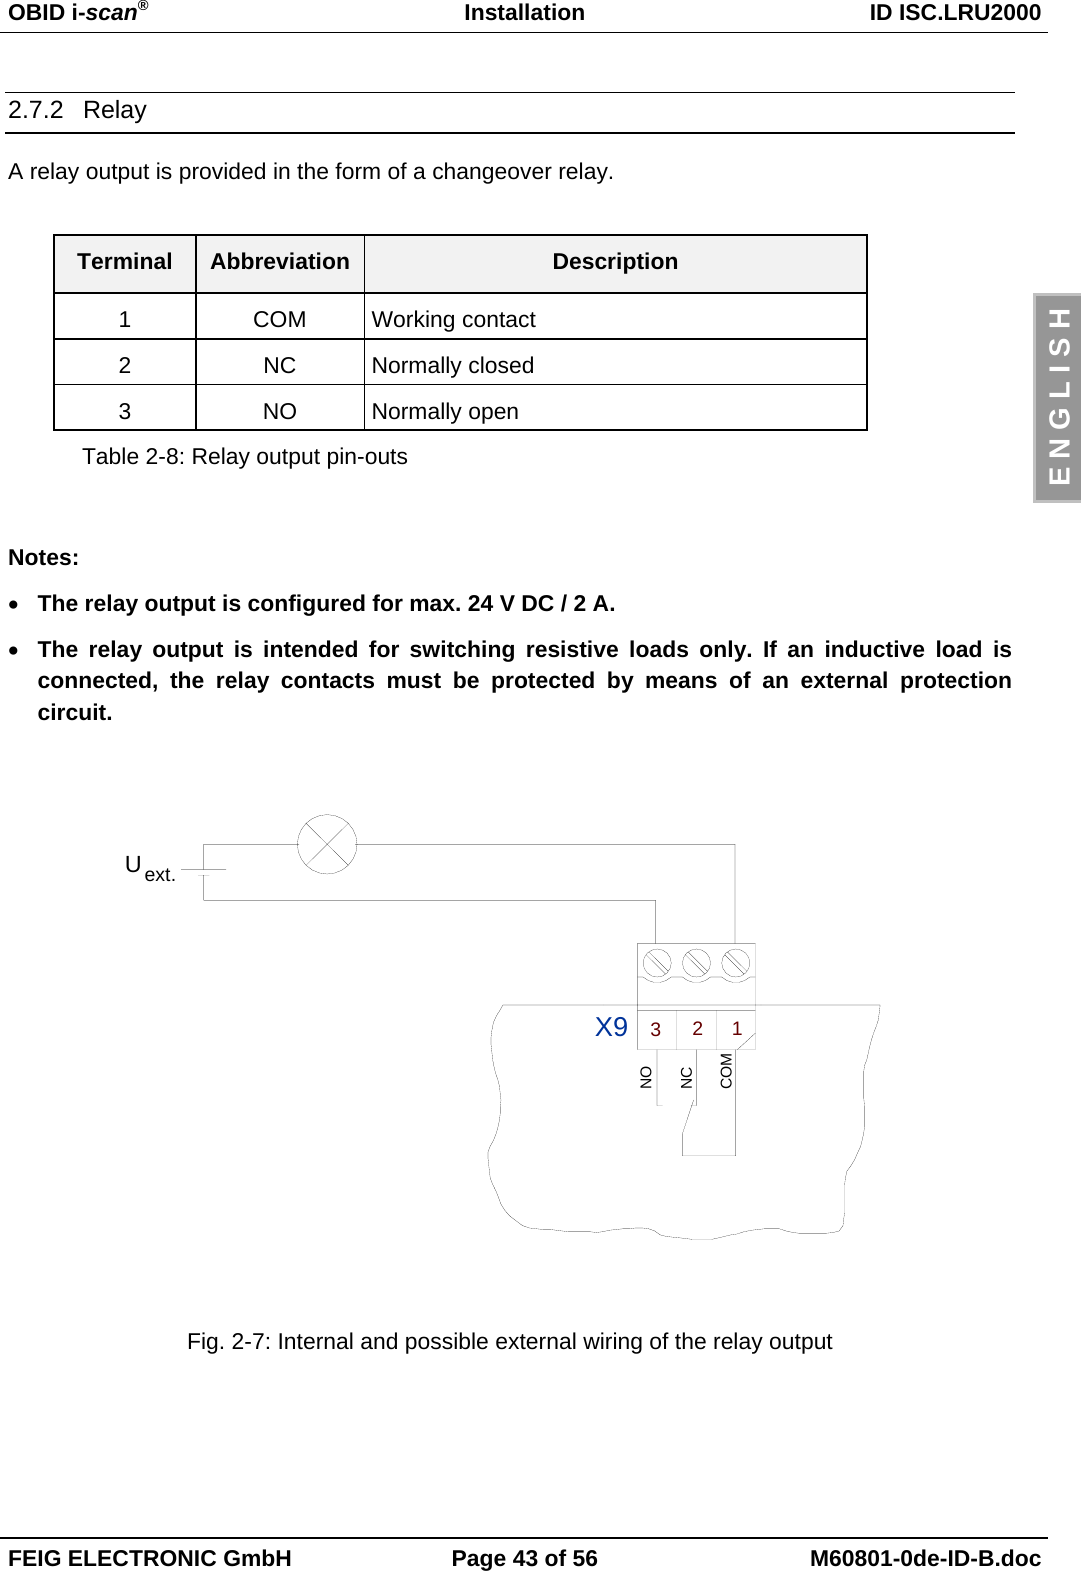 OBID i-scan®Installation ID ISC.LRU2000FEIG ELECTRONIC GmbH Page 43 of 56 M60801-0de-ID-B.docE N G L I S H2.7.2 RelayA relay output is provided in the form of a changeover relay.Terminal Abbreviation Description1 COM Working contact2 NC Normally closed3 NO Normally openTable 2-8: Relay output pin-outsNotes:• The relay output is configured for max. 24 V DC / 2 A.• The relay output is intended for switching resistive loads only. If an inductive load isconnected, the relay contacts must be protected by means of an external protectioncircuit.ext.U123X9COMNONCFig. 2-7: Internal and possible external wiring of the relay output